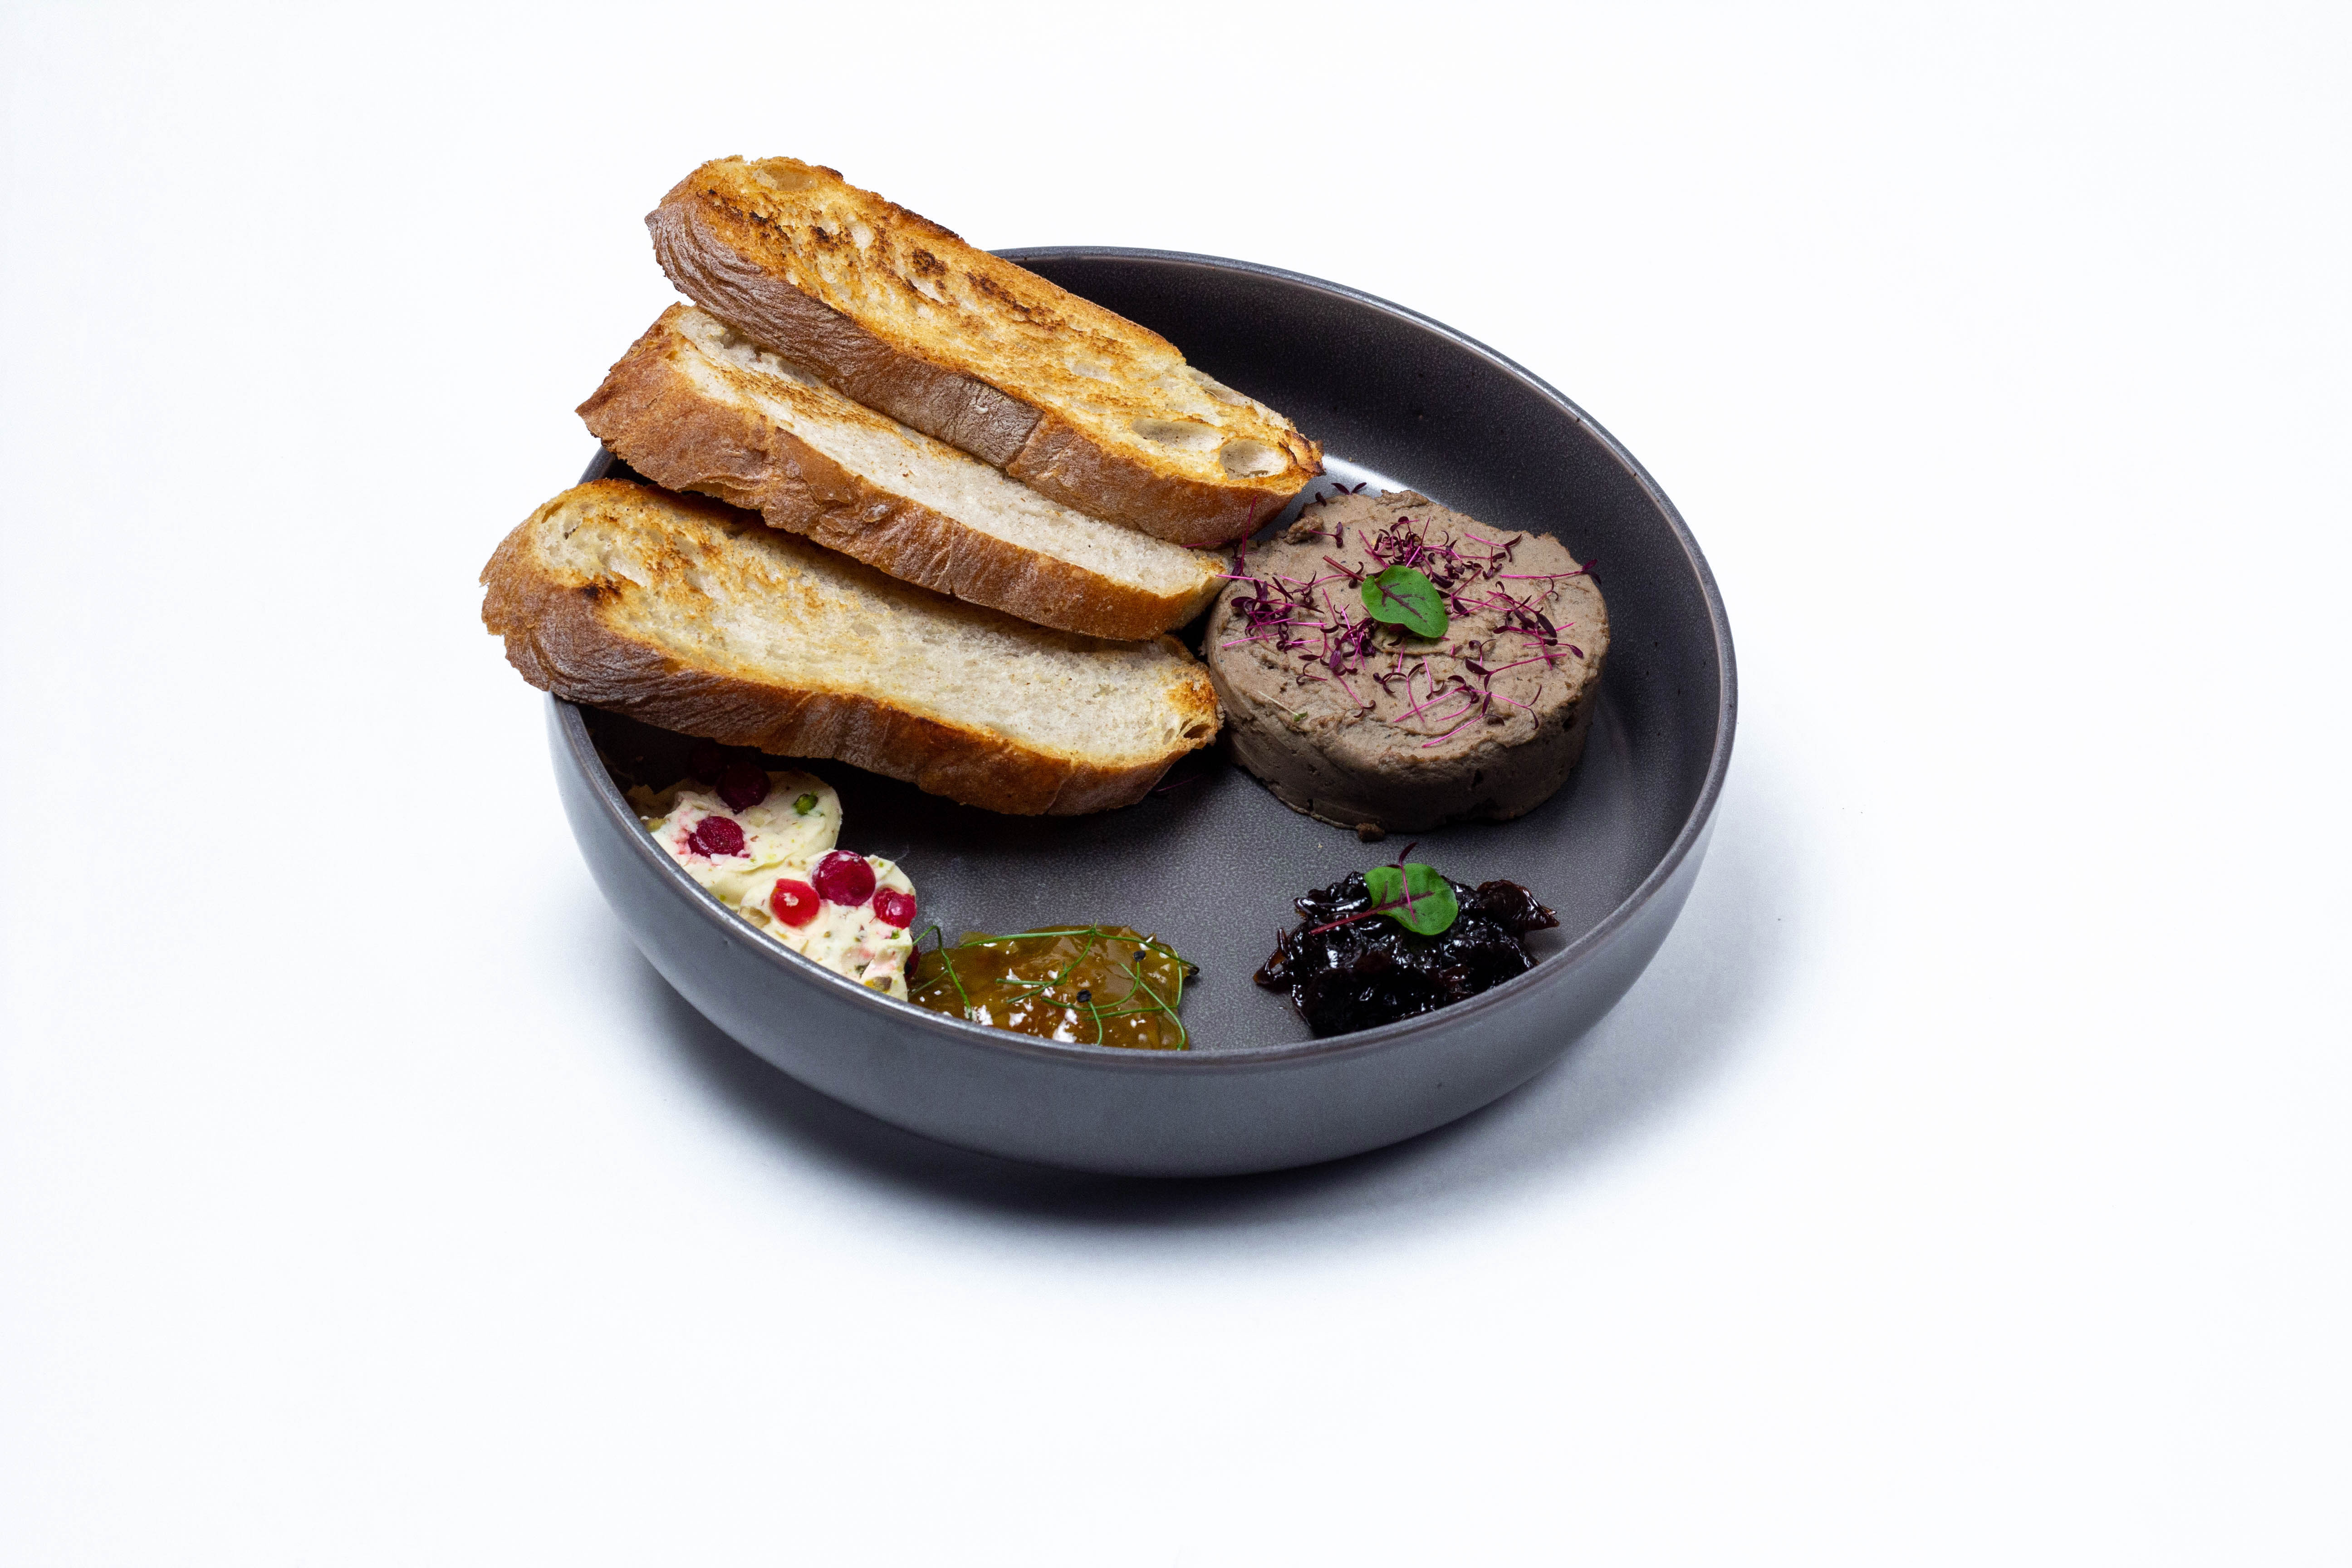 Chicken pate with caramelized onion, orange jam, ciabatta and butter with fresh currants and almonds